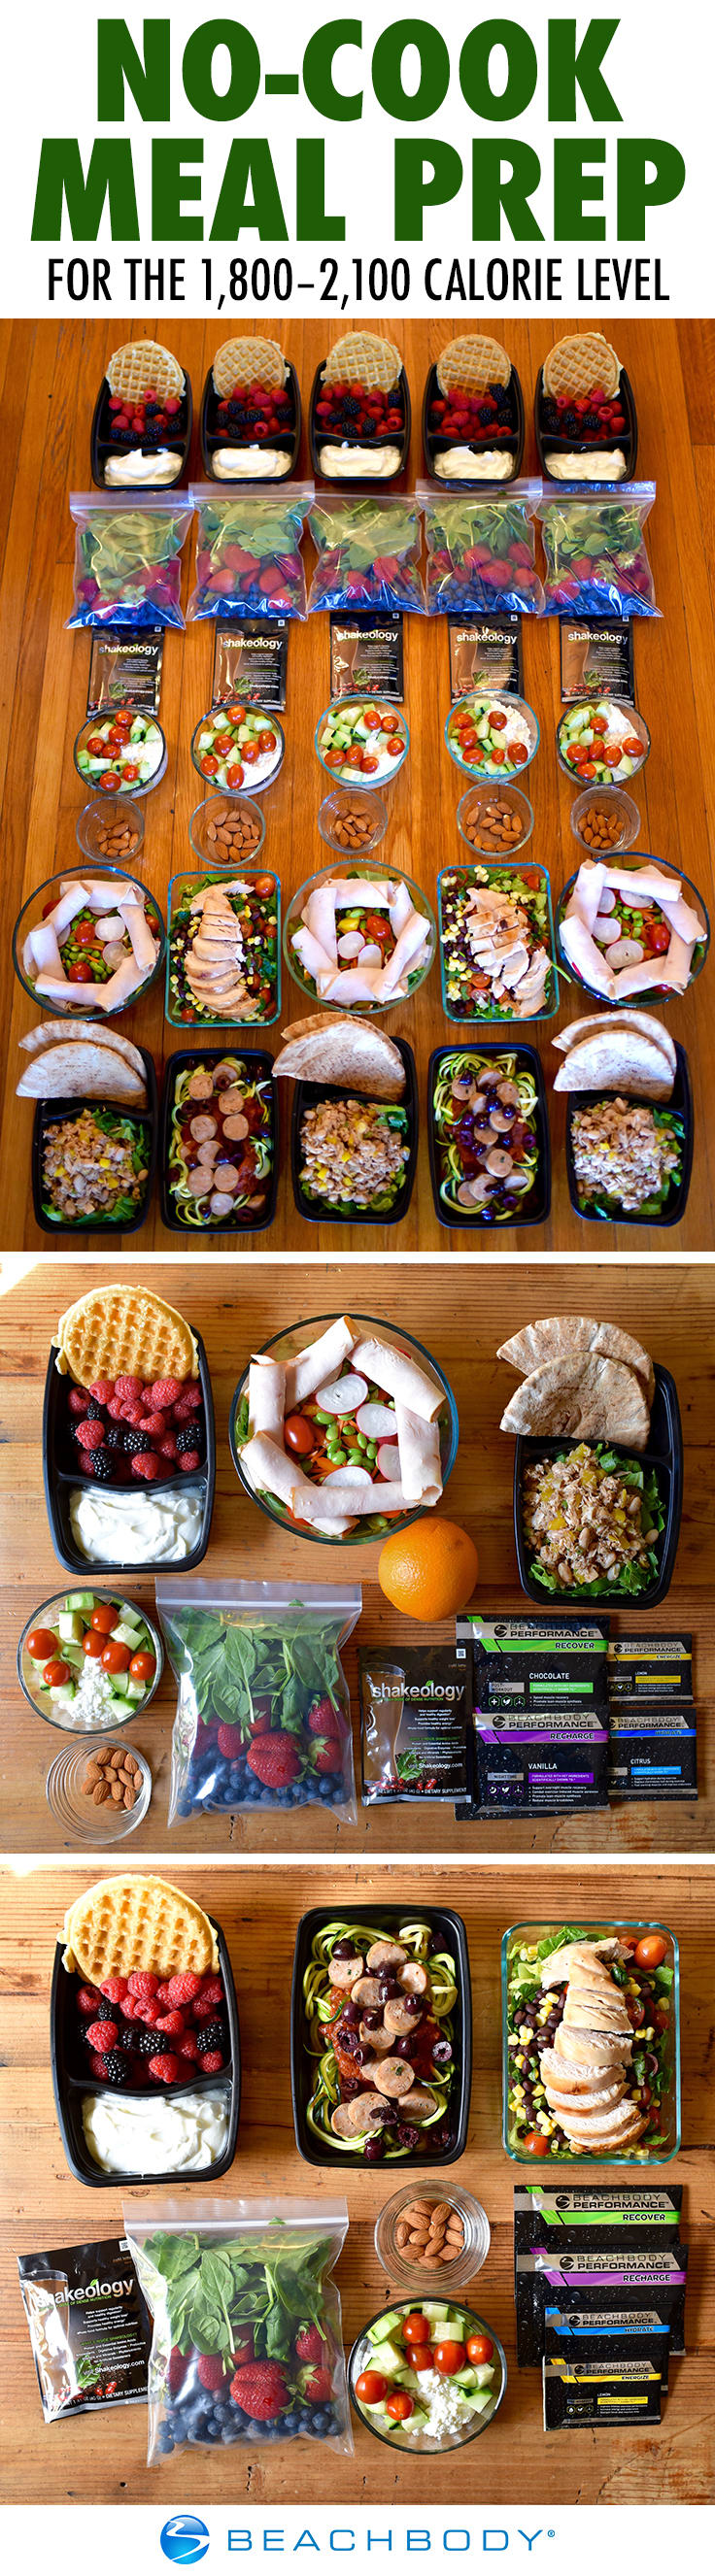 NoCook Meal Prep for the 1,8002,100 Calorie Level The